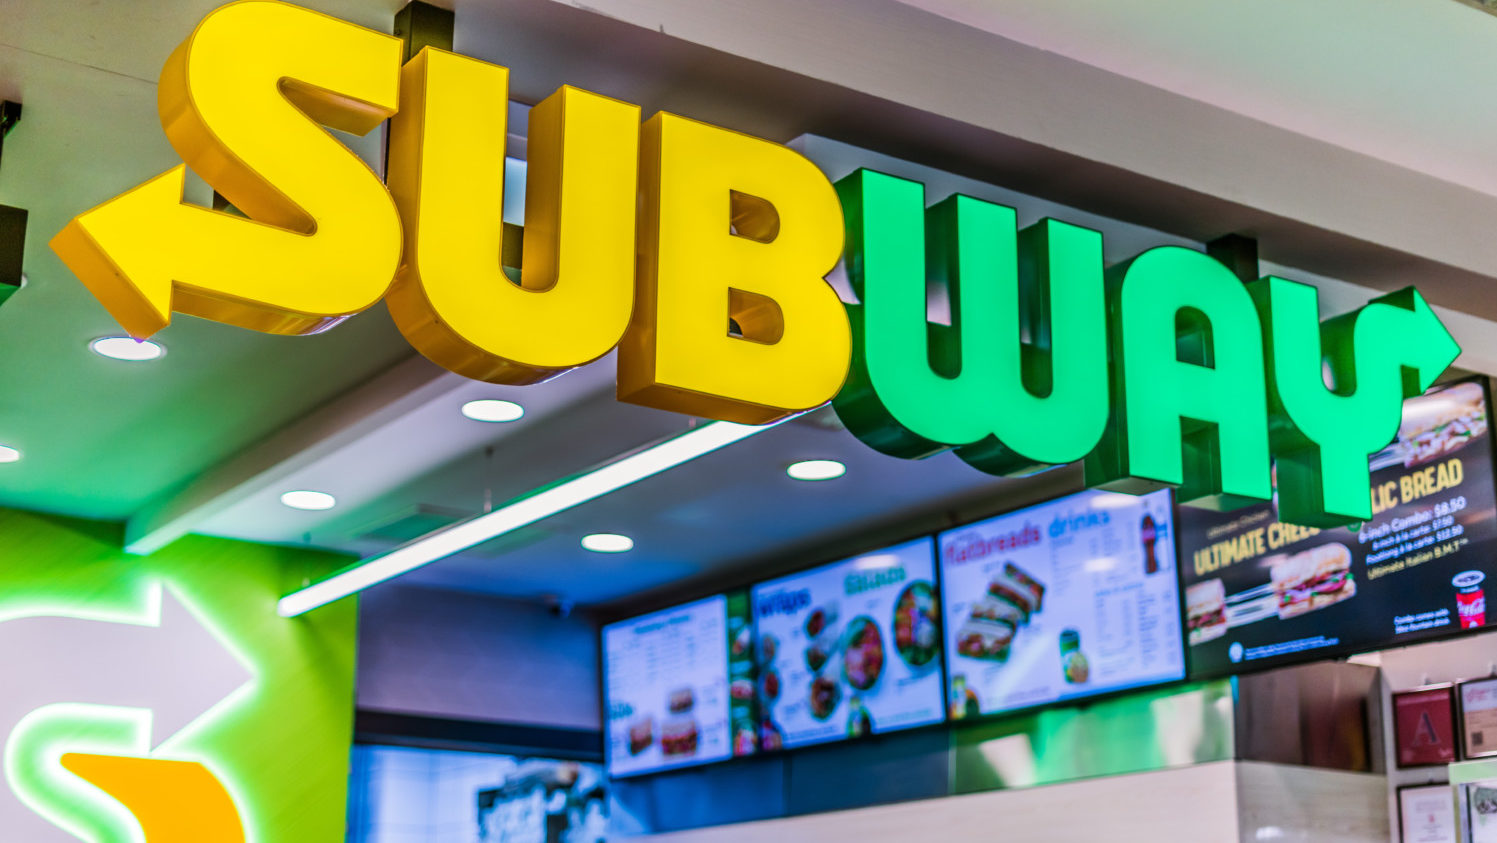 Subway sandwich sign at entrance to restaurant